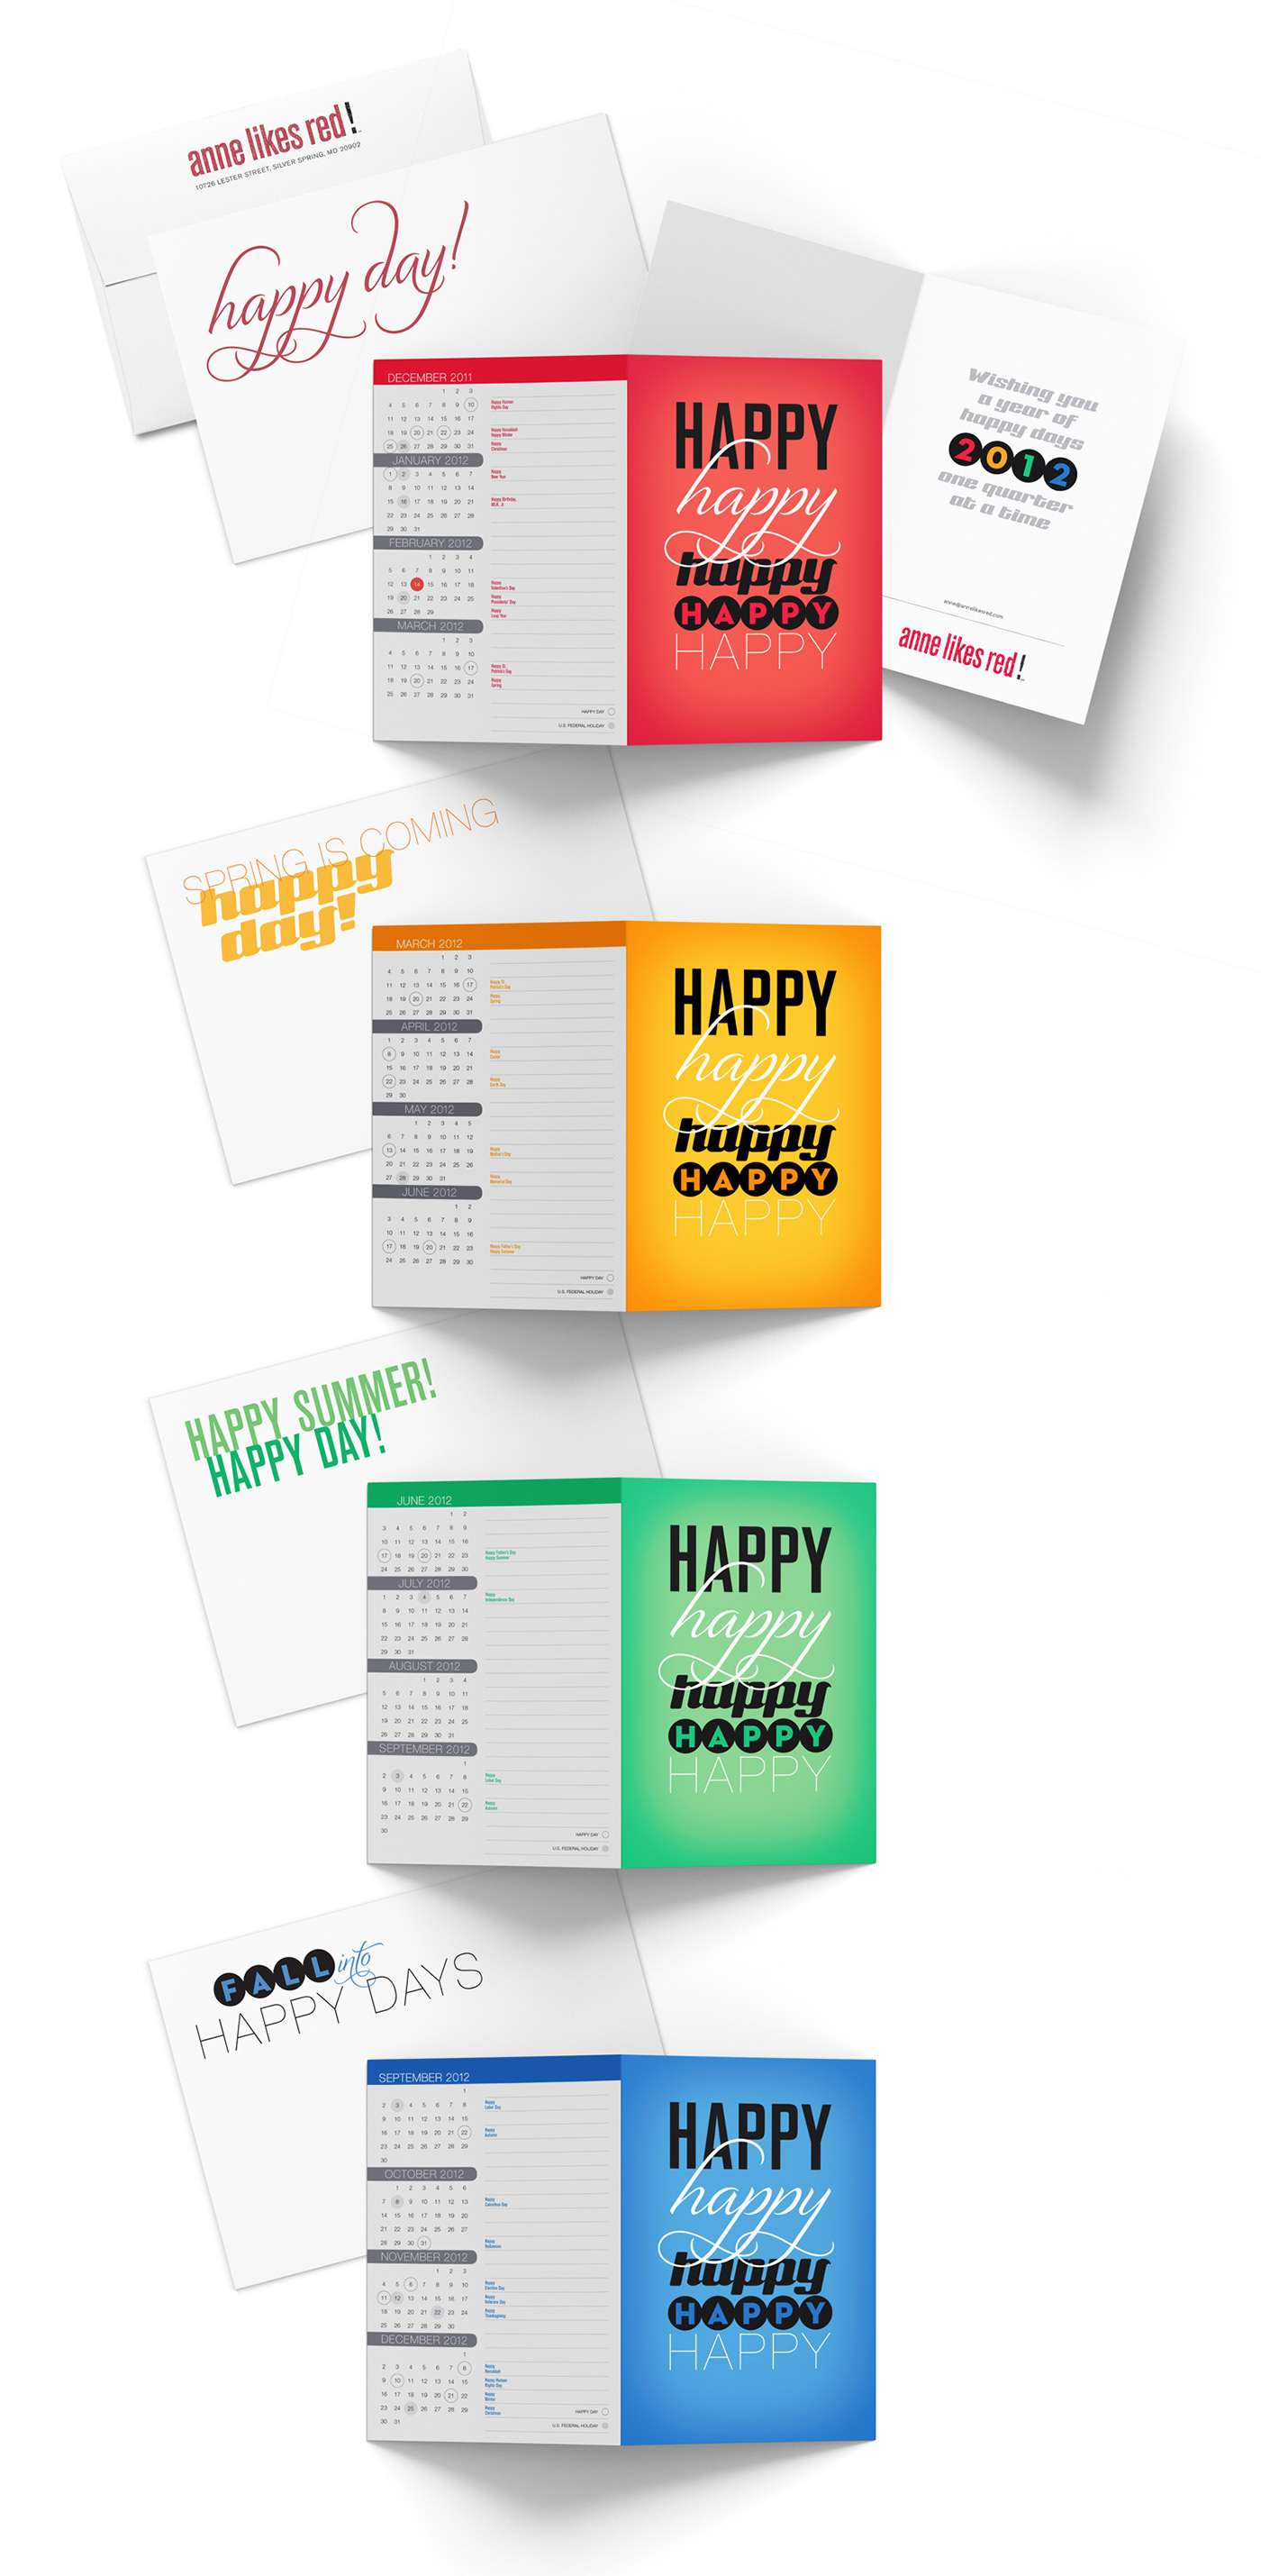 Direct mail cards envelopes postcards stickers Promotional Self Promo altruism